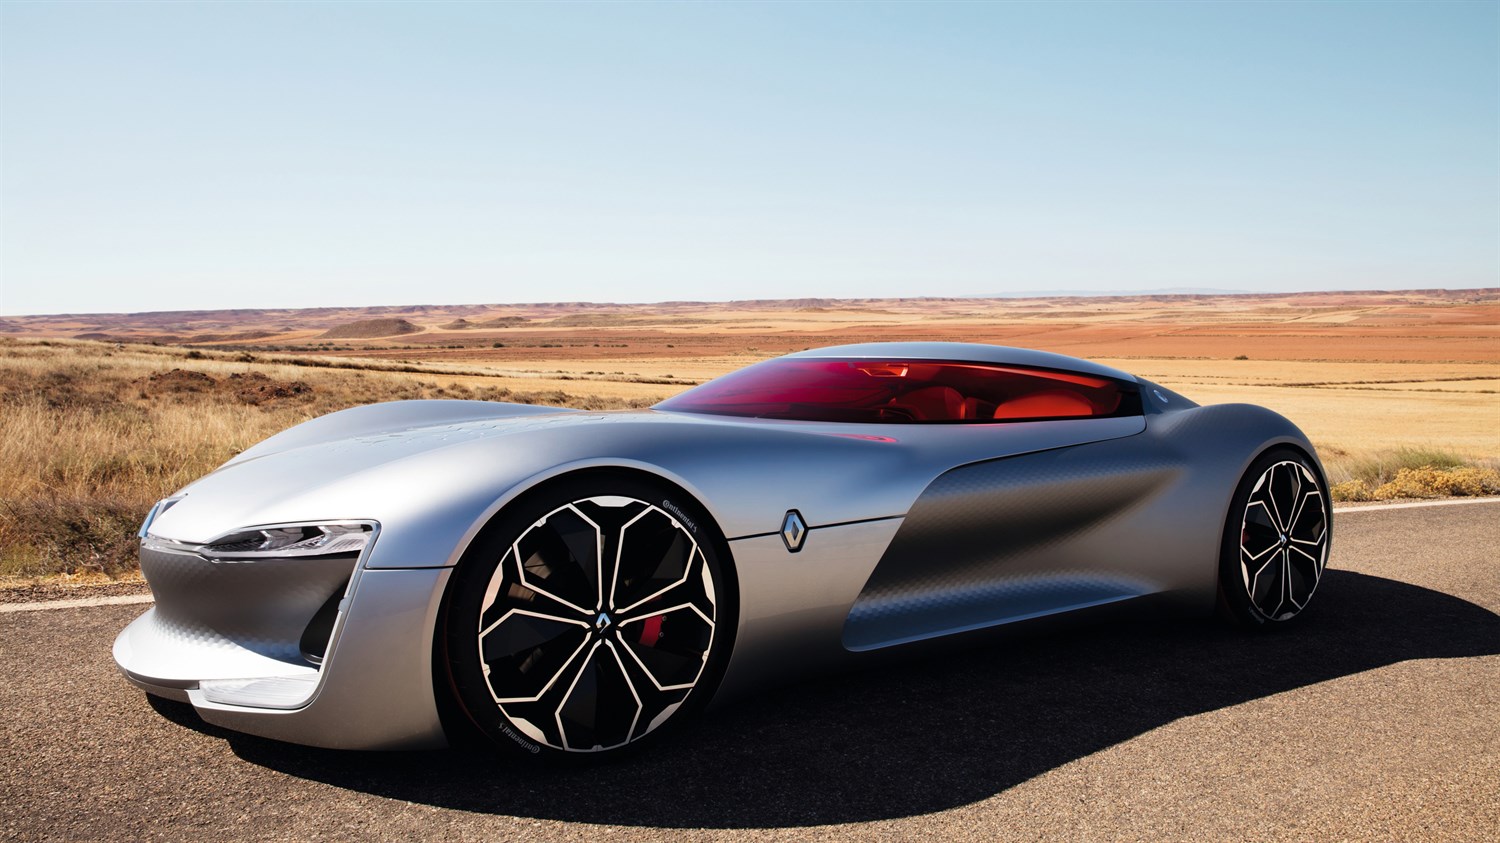 Renault TREZOR concept car on the road